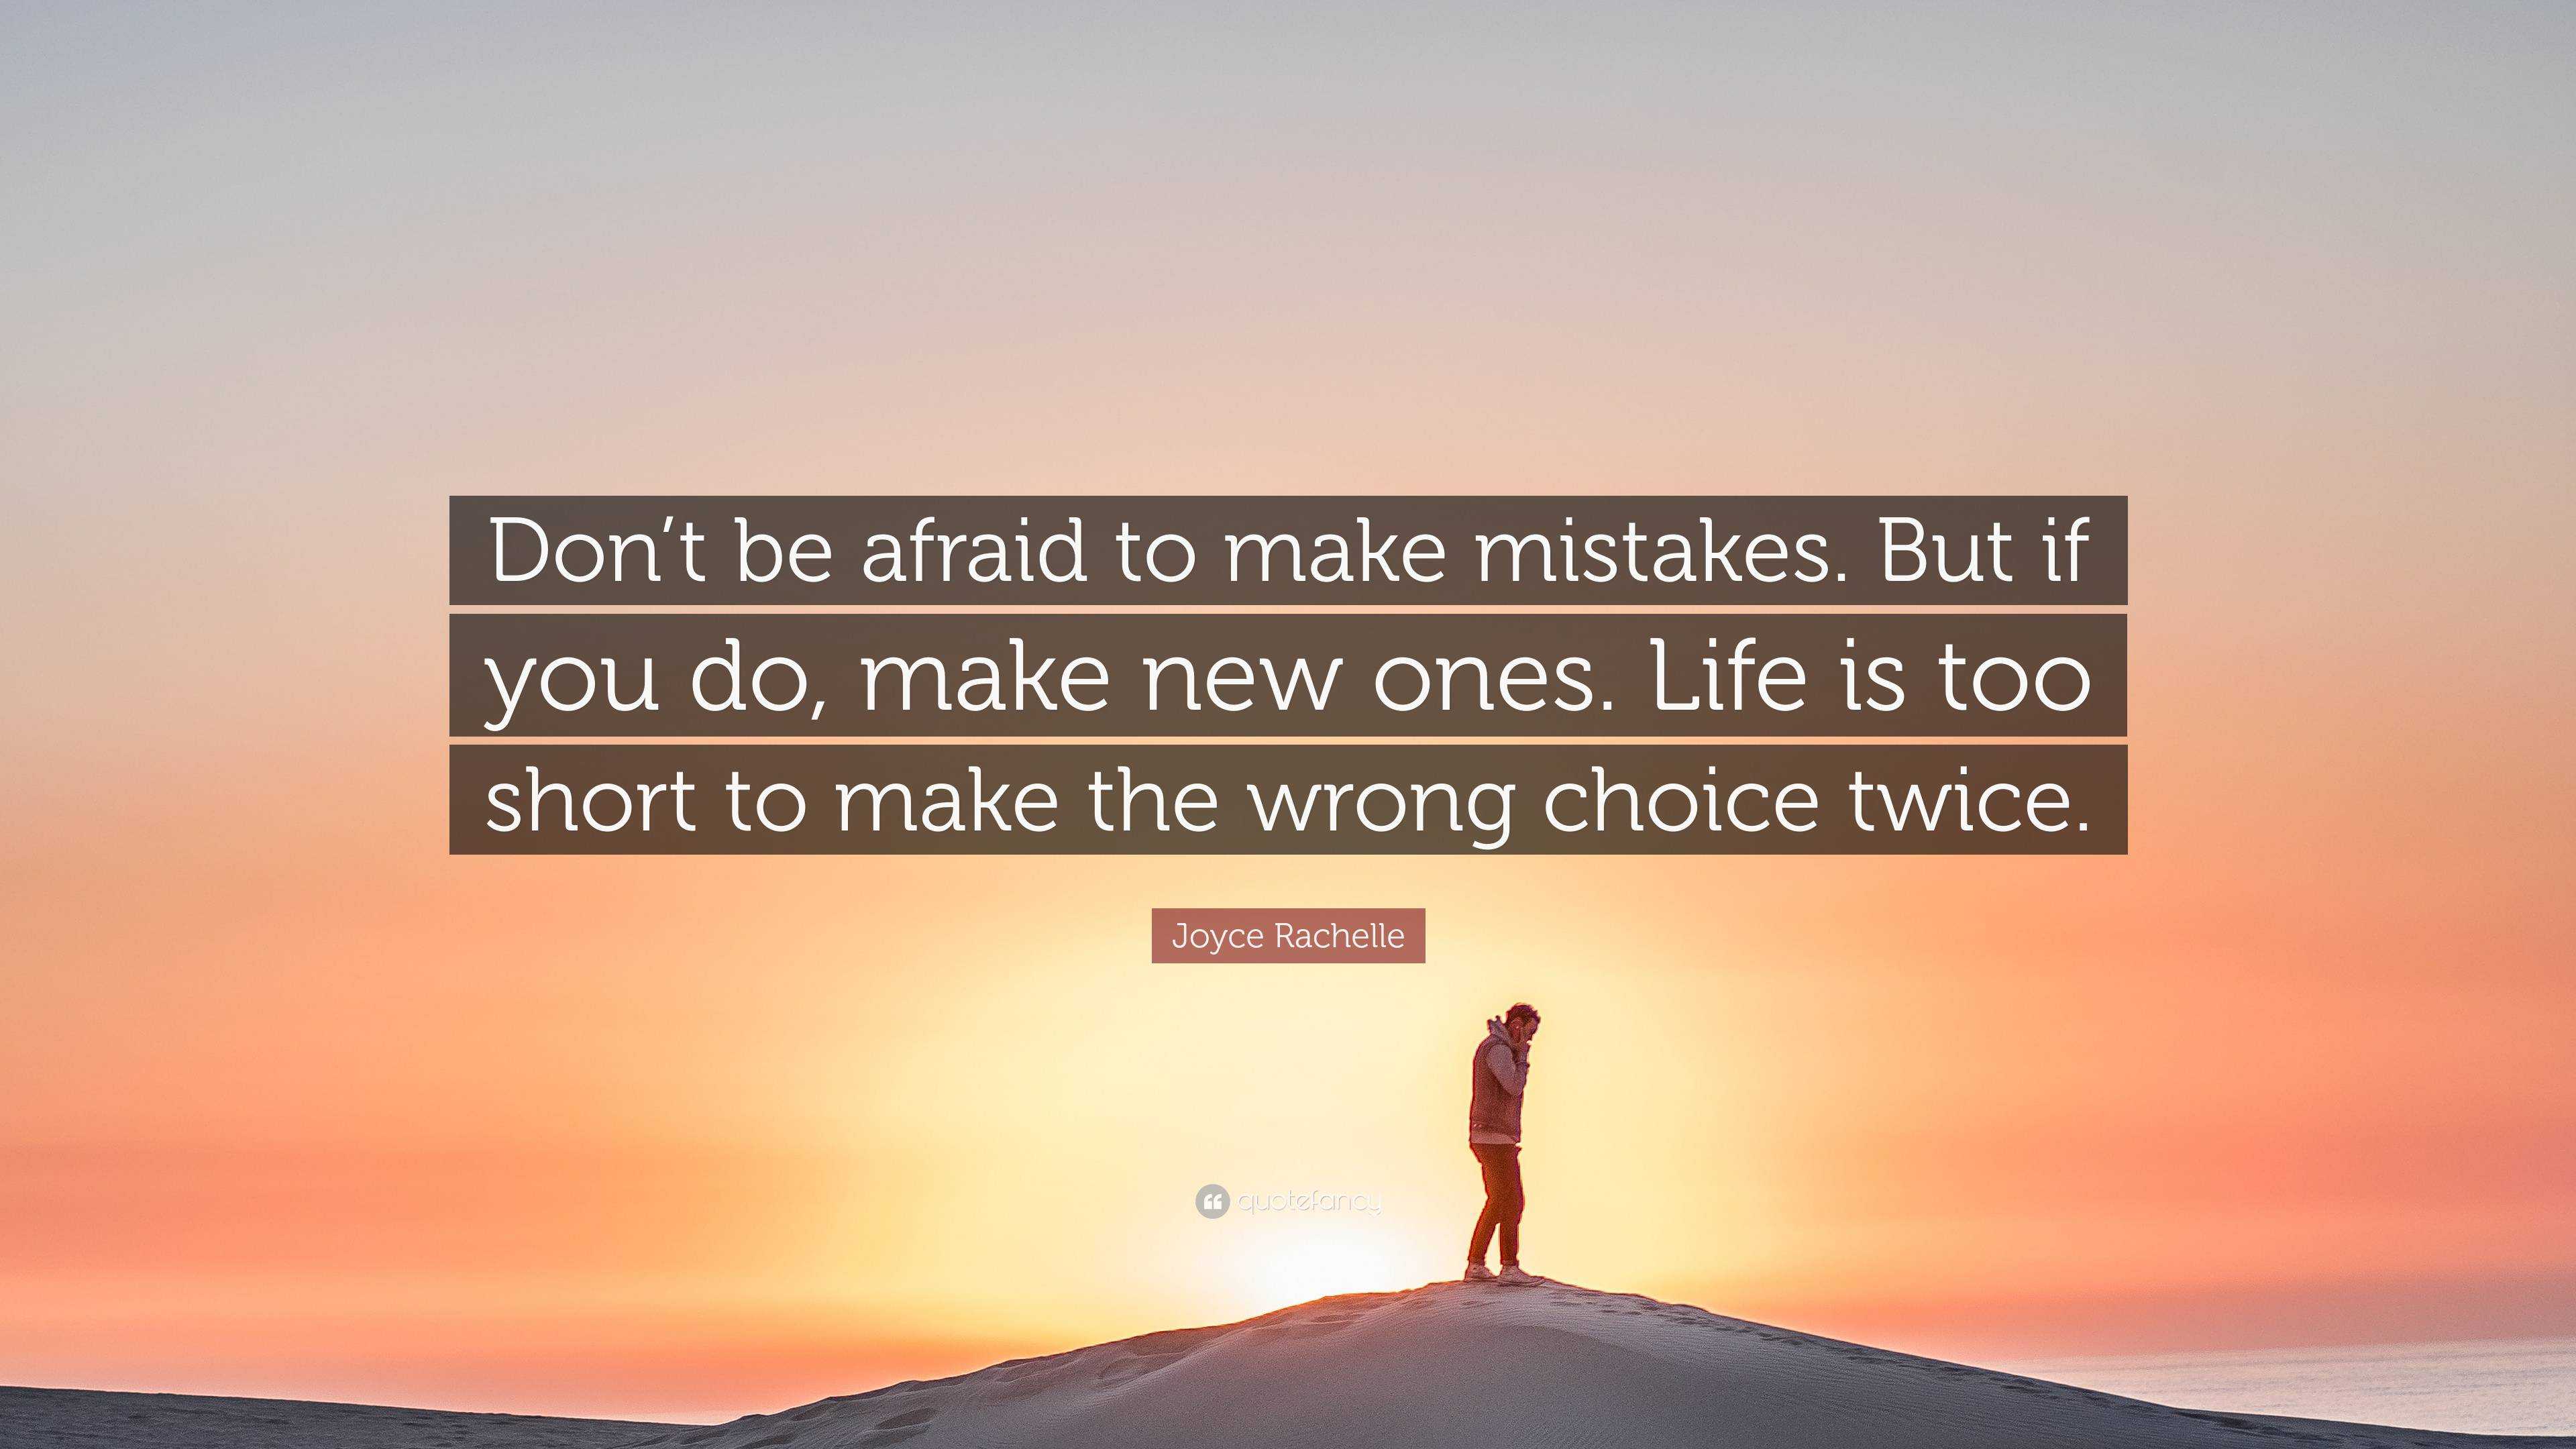 Joyce Rachelle Quote Don T Be Afraid To Make Mistakes But If You Do Make New Ones Life Is Too Short To Make The Wrong Choice Twice 2 Wallpapers Quotefancy